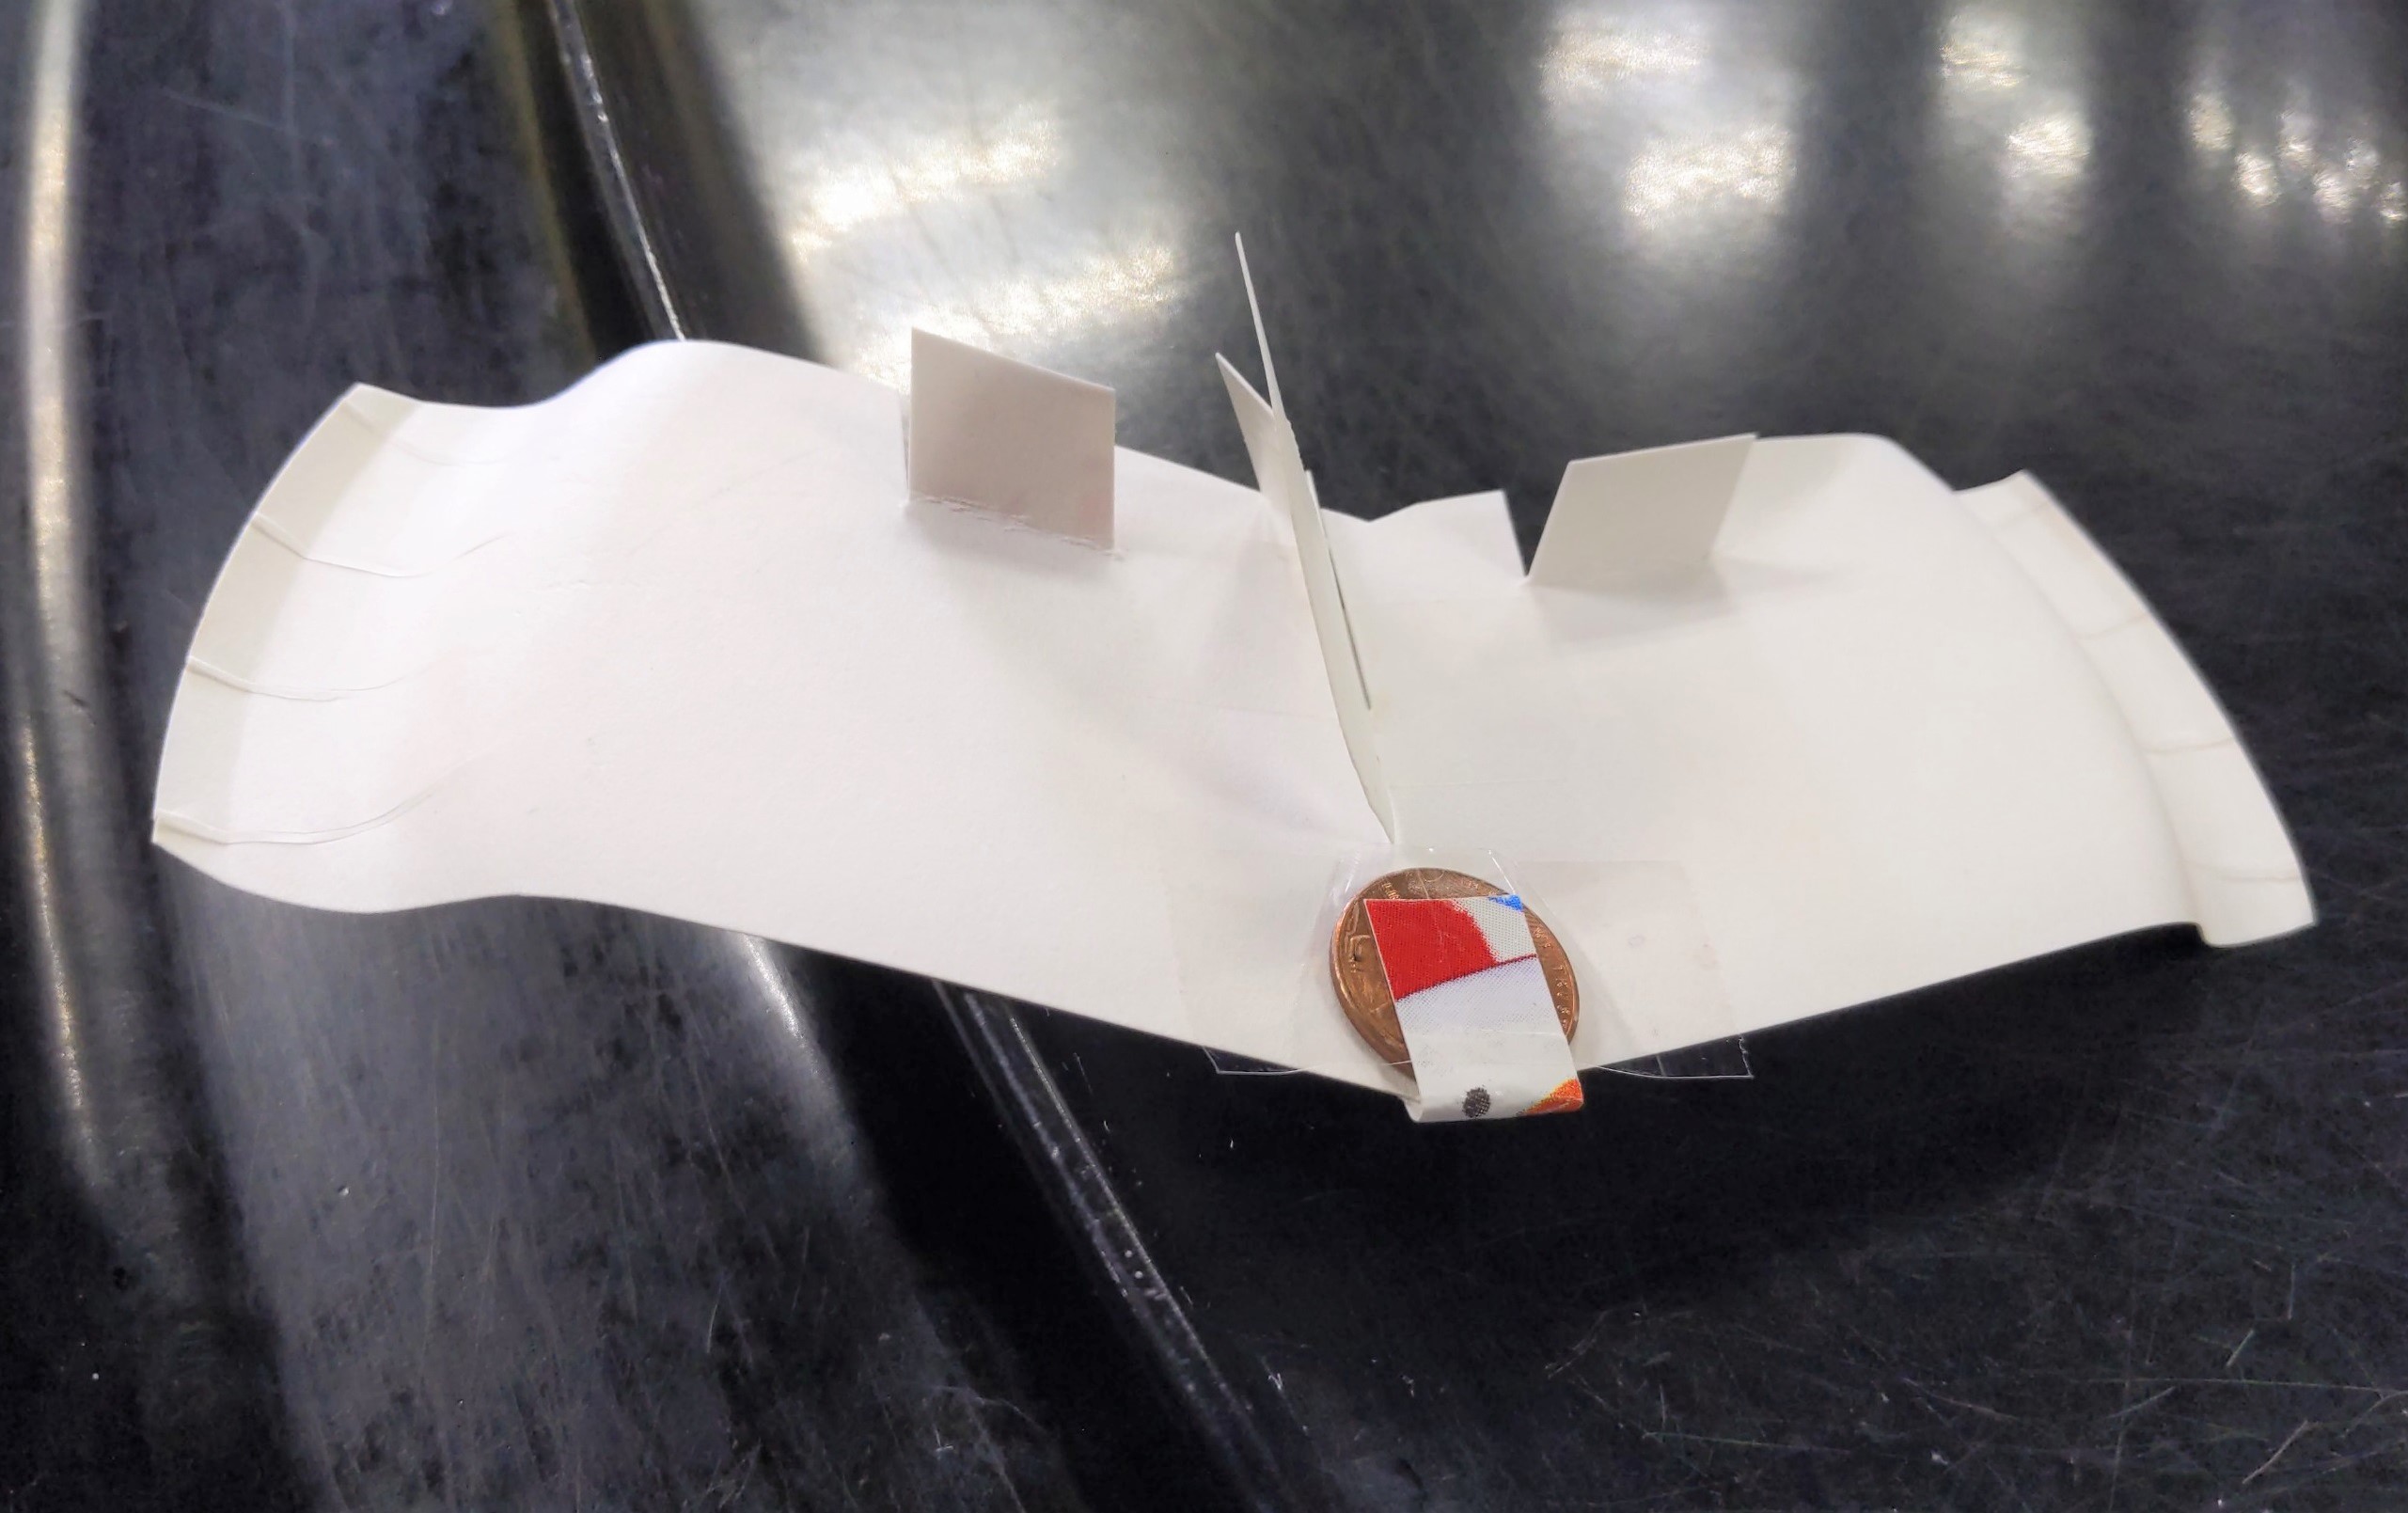 Figure 5. An image of a constructed foam plate glider-9. Students modify the various flaps on the plane throughout the third VFT session to test how forces influence the distance traveled by the foam plate glider-9.